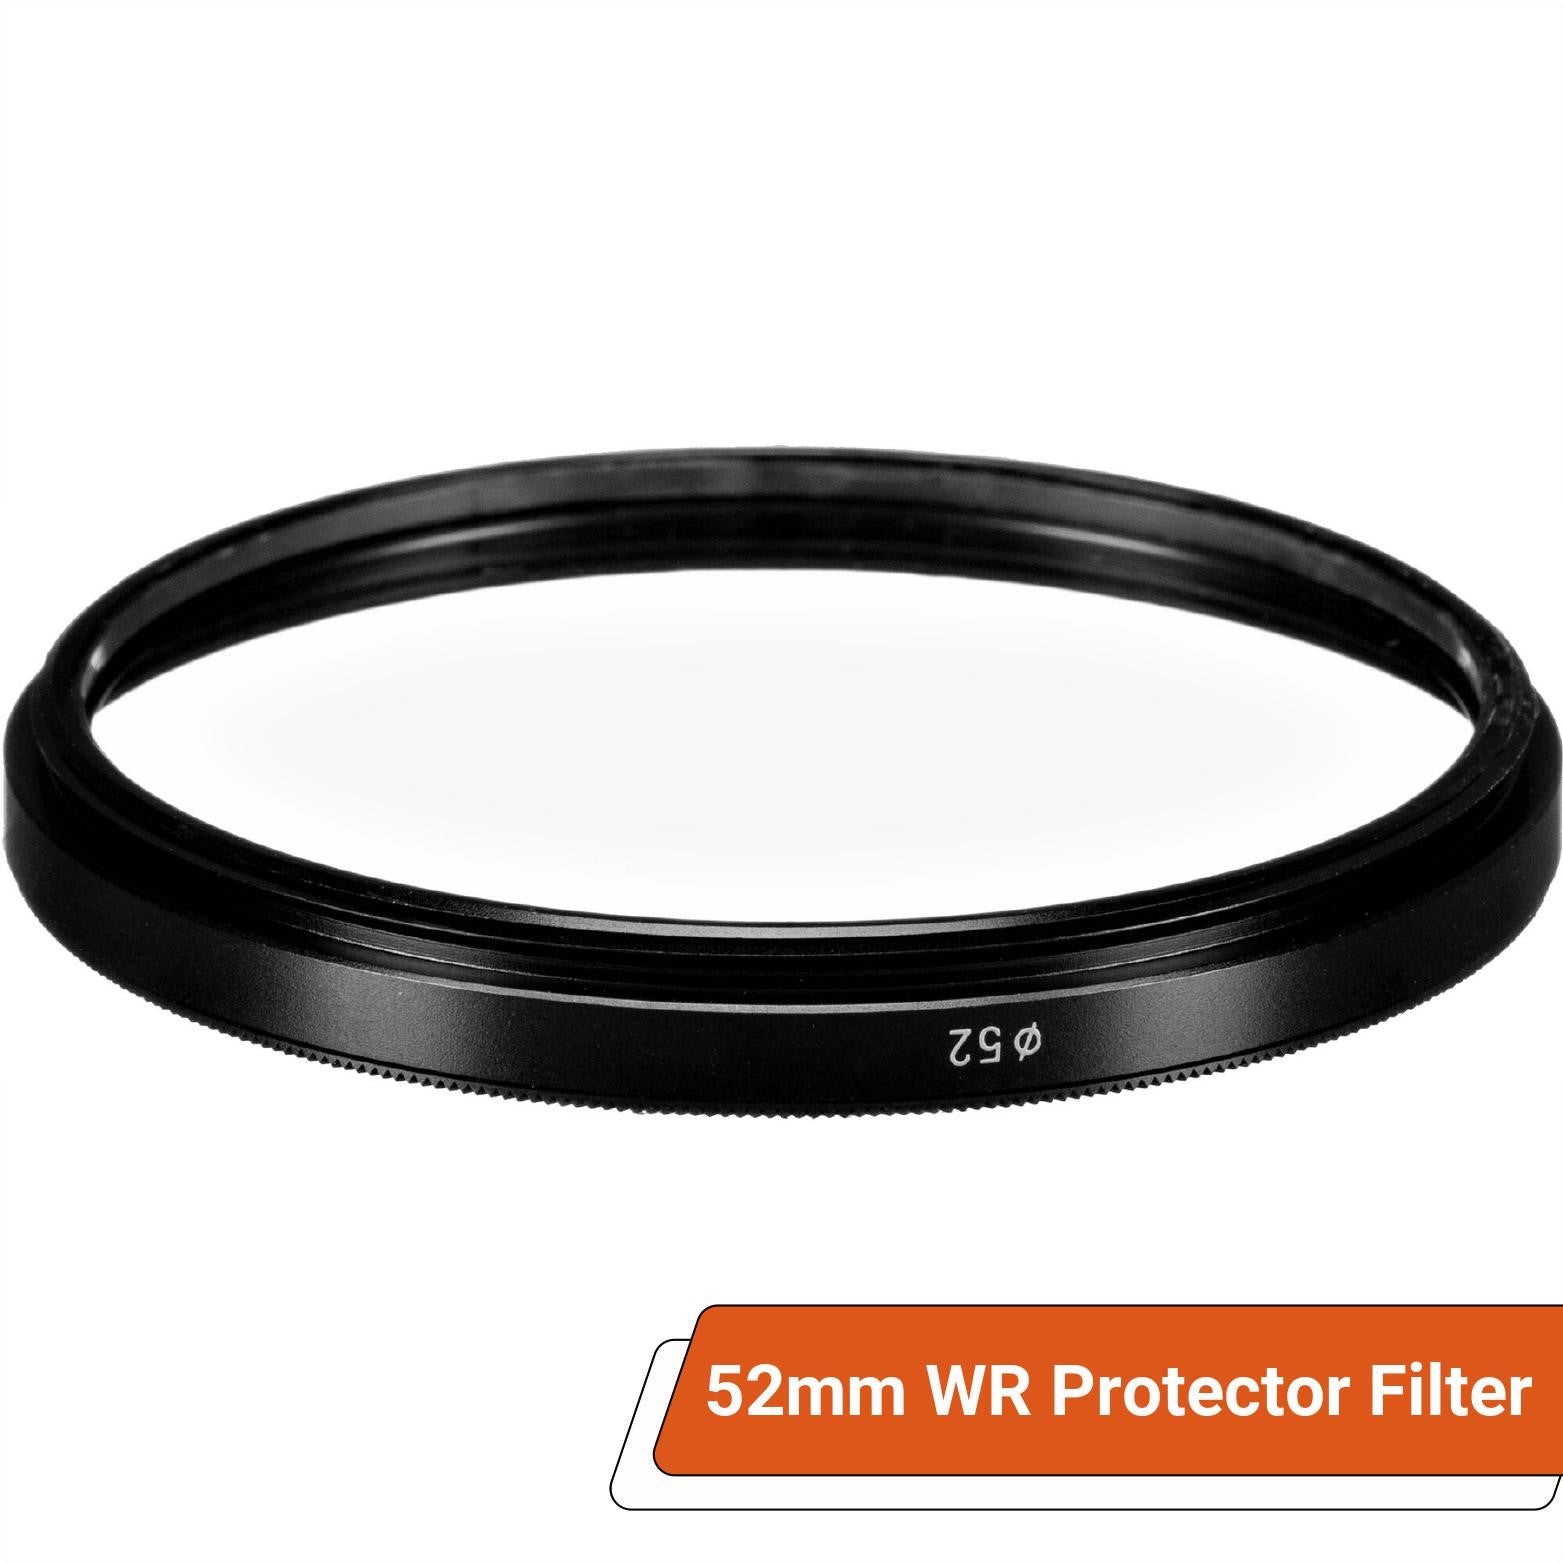 Sigma 52mm WR (Water Repellent) Protector Filter